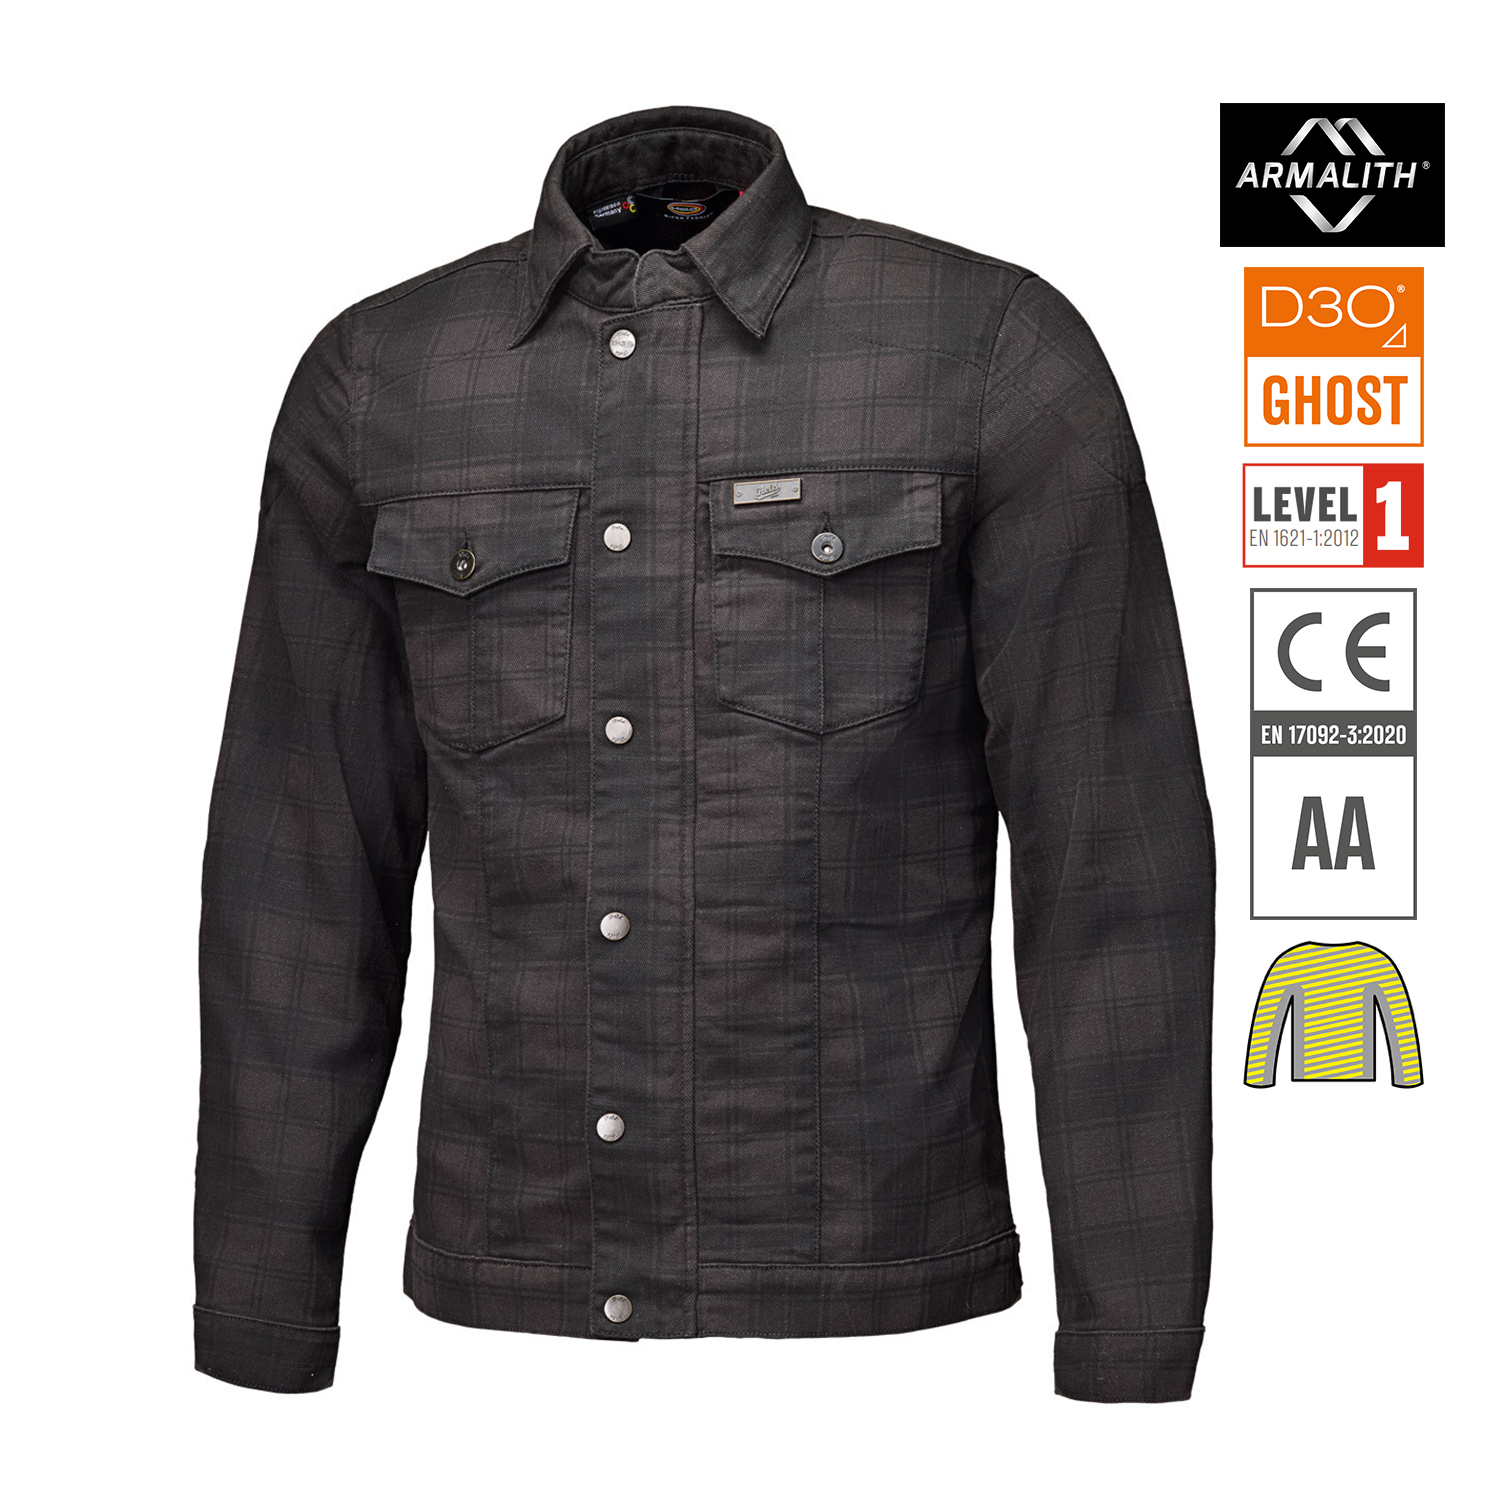 Held Woodland Armalith Jacket Black-Grey - Available in Various Sizes